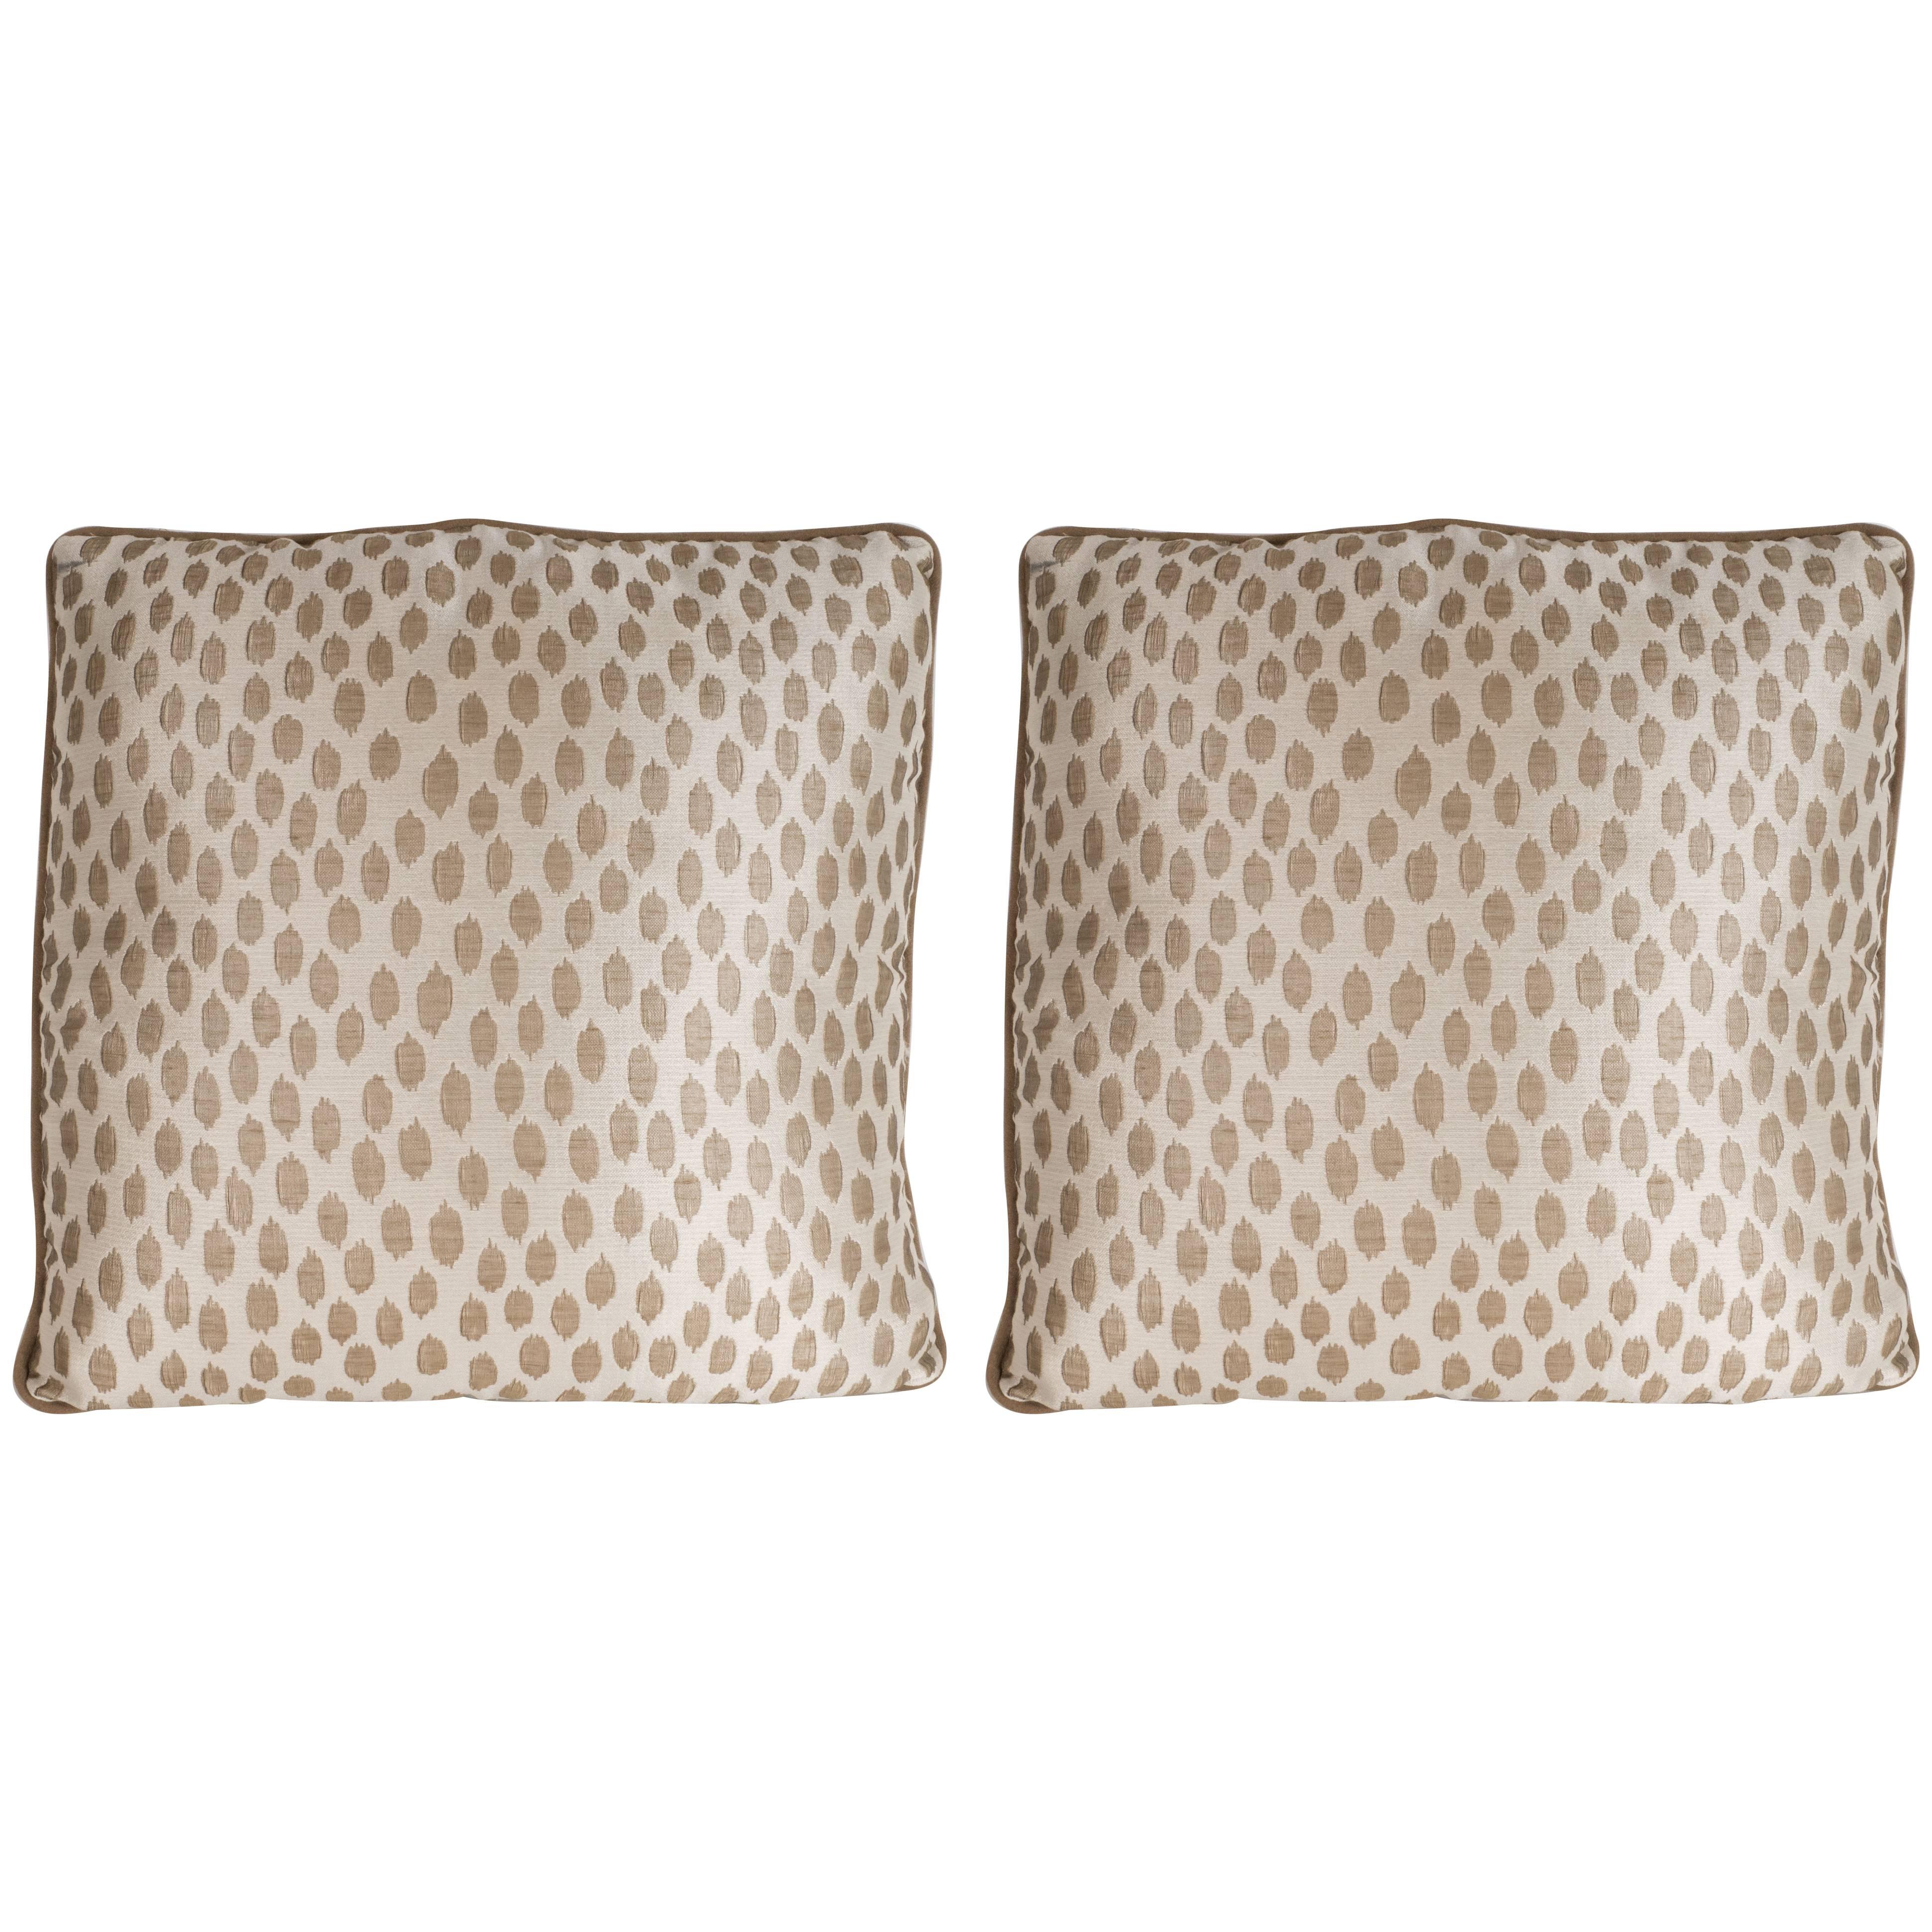 Pair of Modernist Square Pillows in Ecru & Muted Gold Tones with Piping Details For Sale